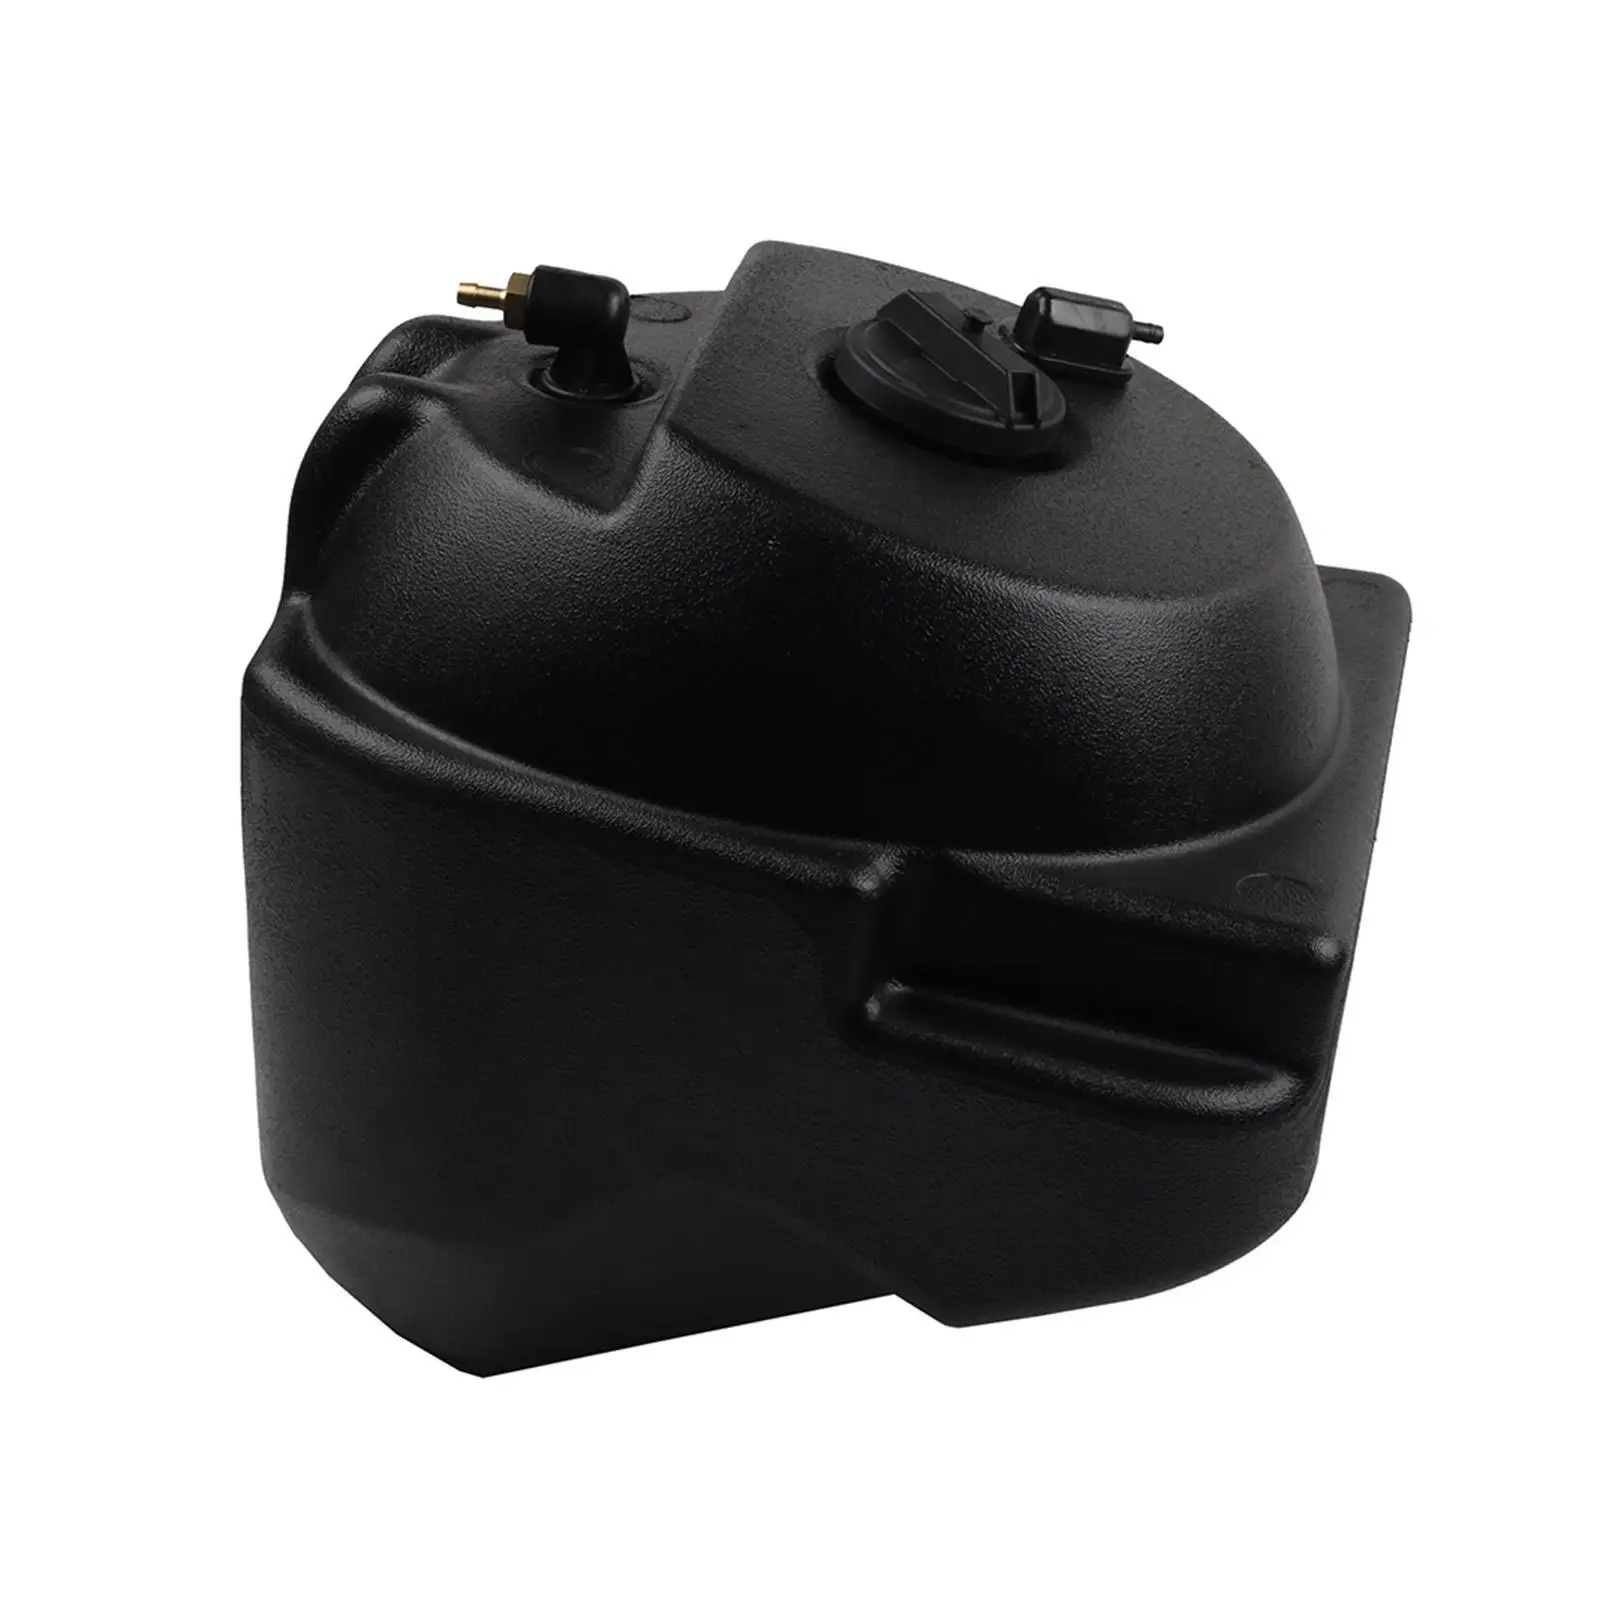 Auxiliary Fuel Tank Motorcycle Accessories Assembly Replacement Oil Tank Fuel Tank Oil Box for Yamaha Xmax300 Tmax560